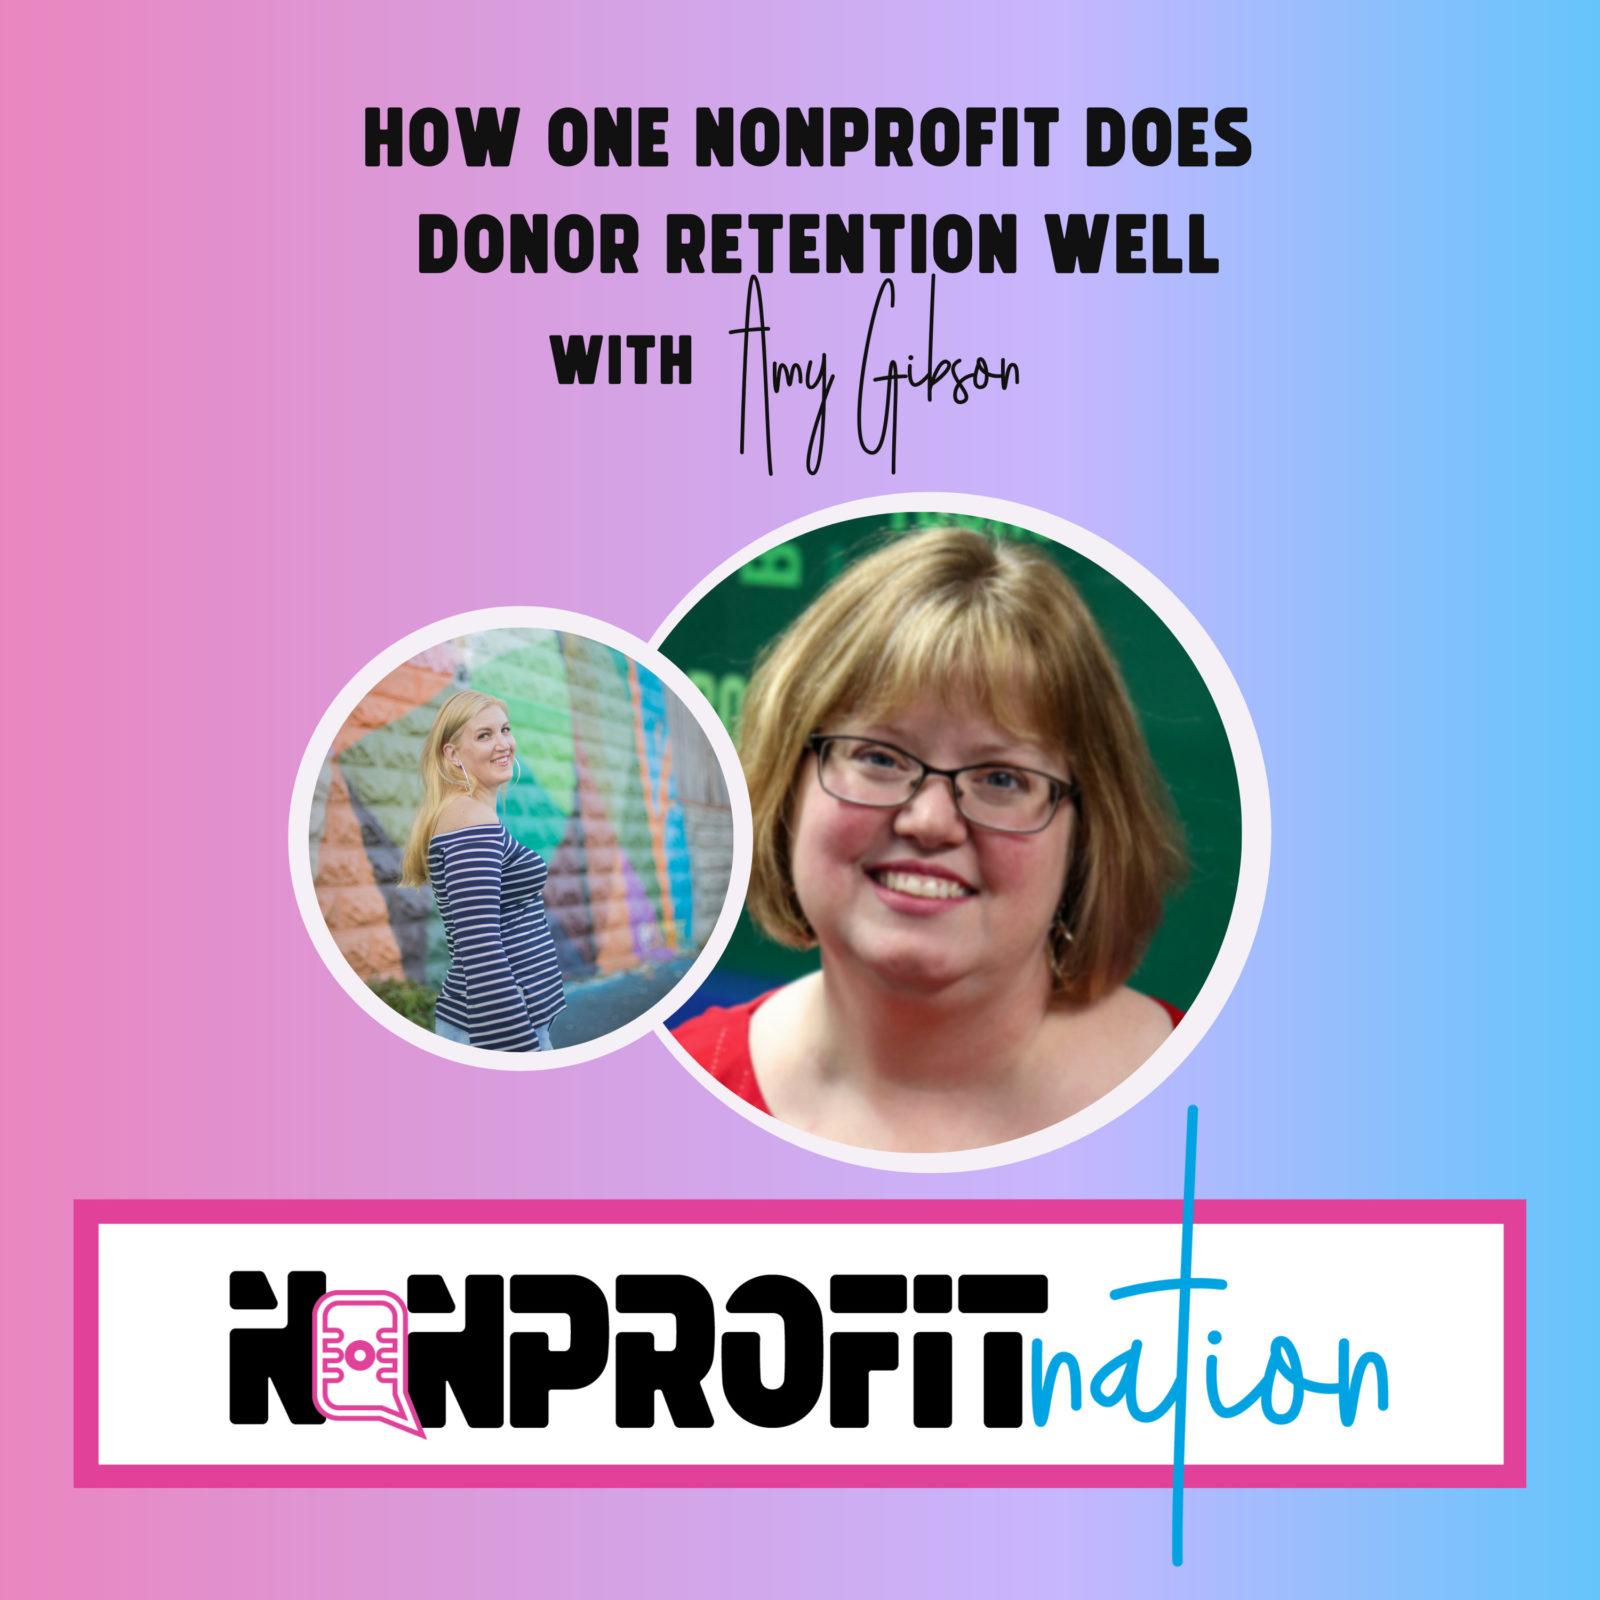 How This Nonprofit Retains 46% of Their Donors with Amy Gibson